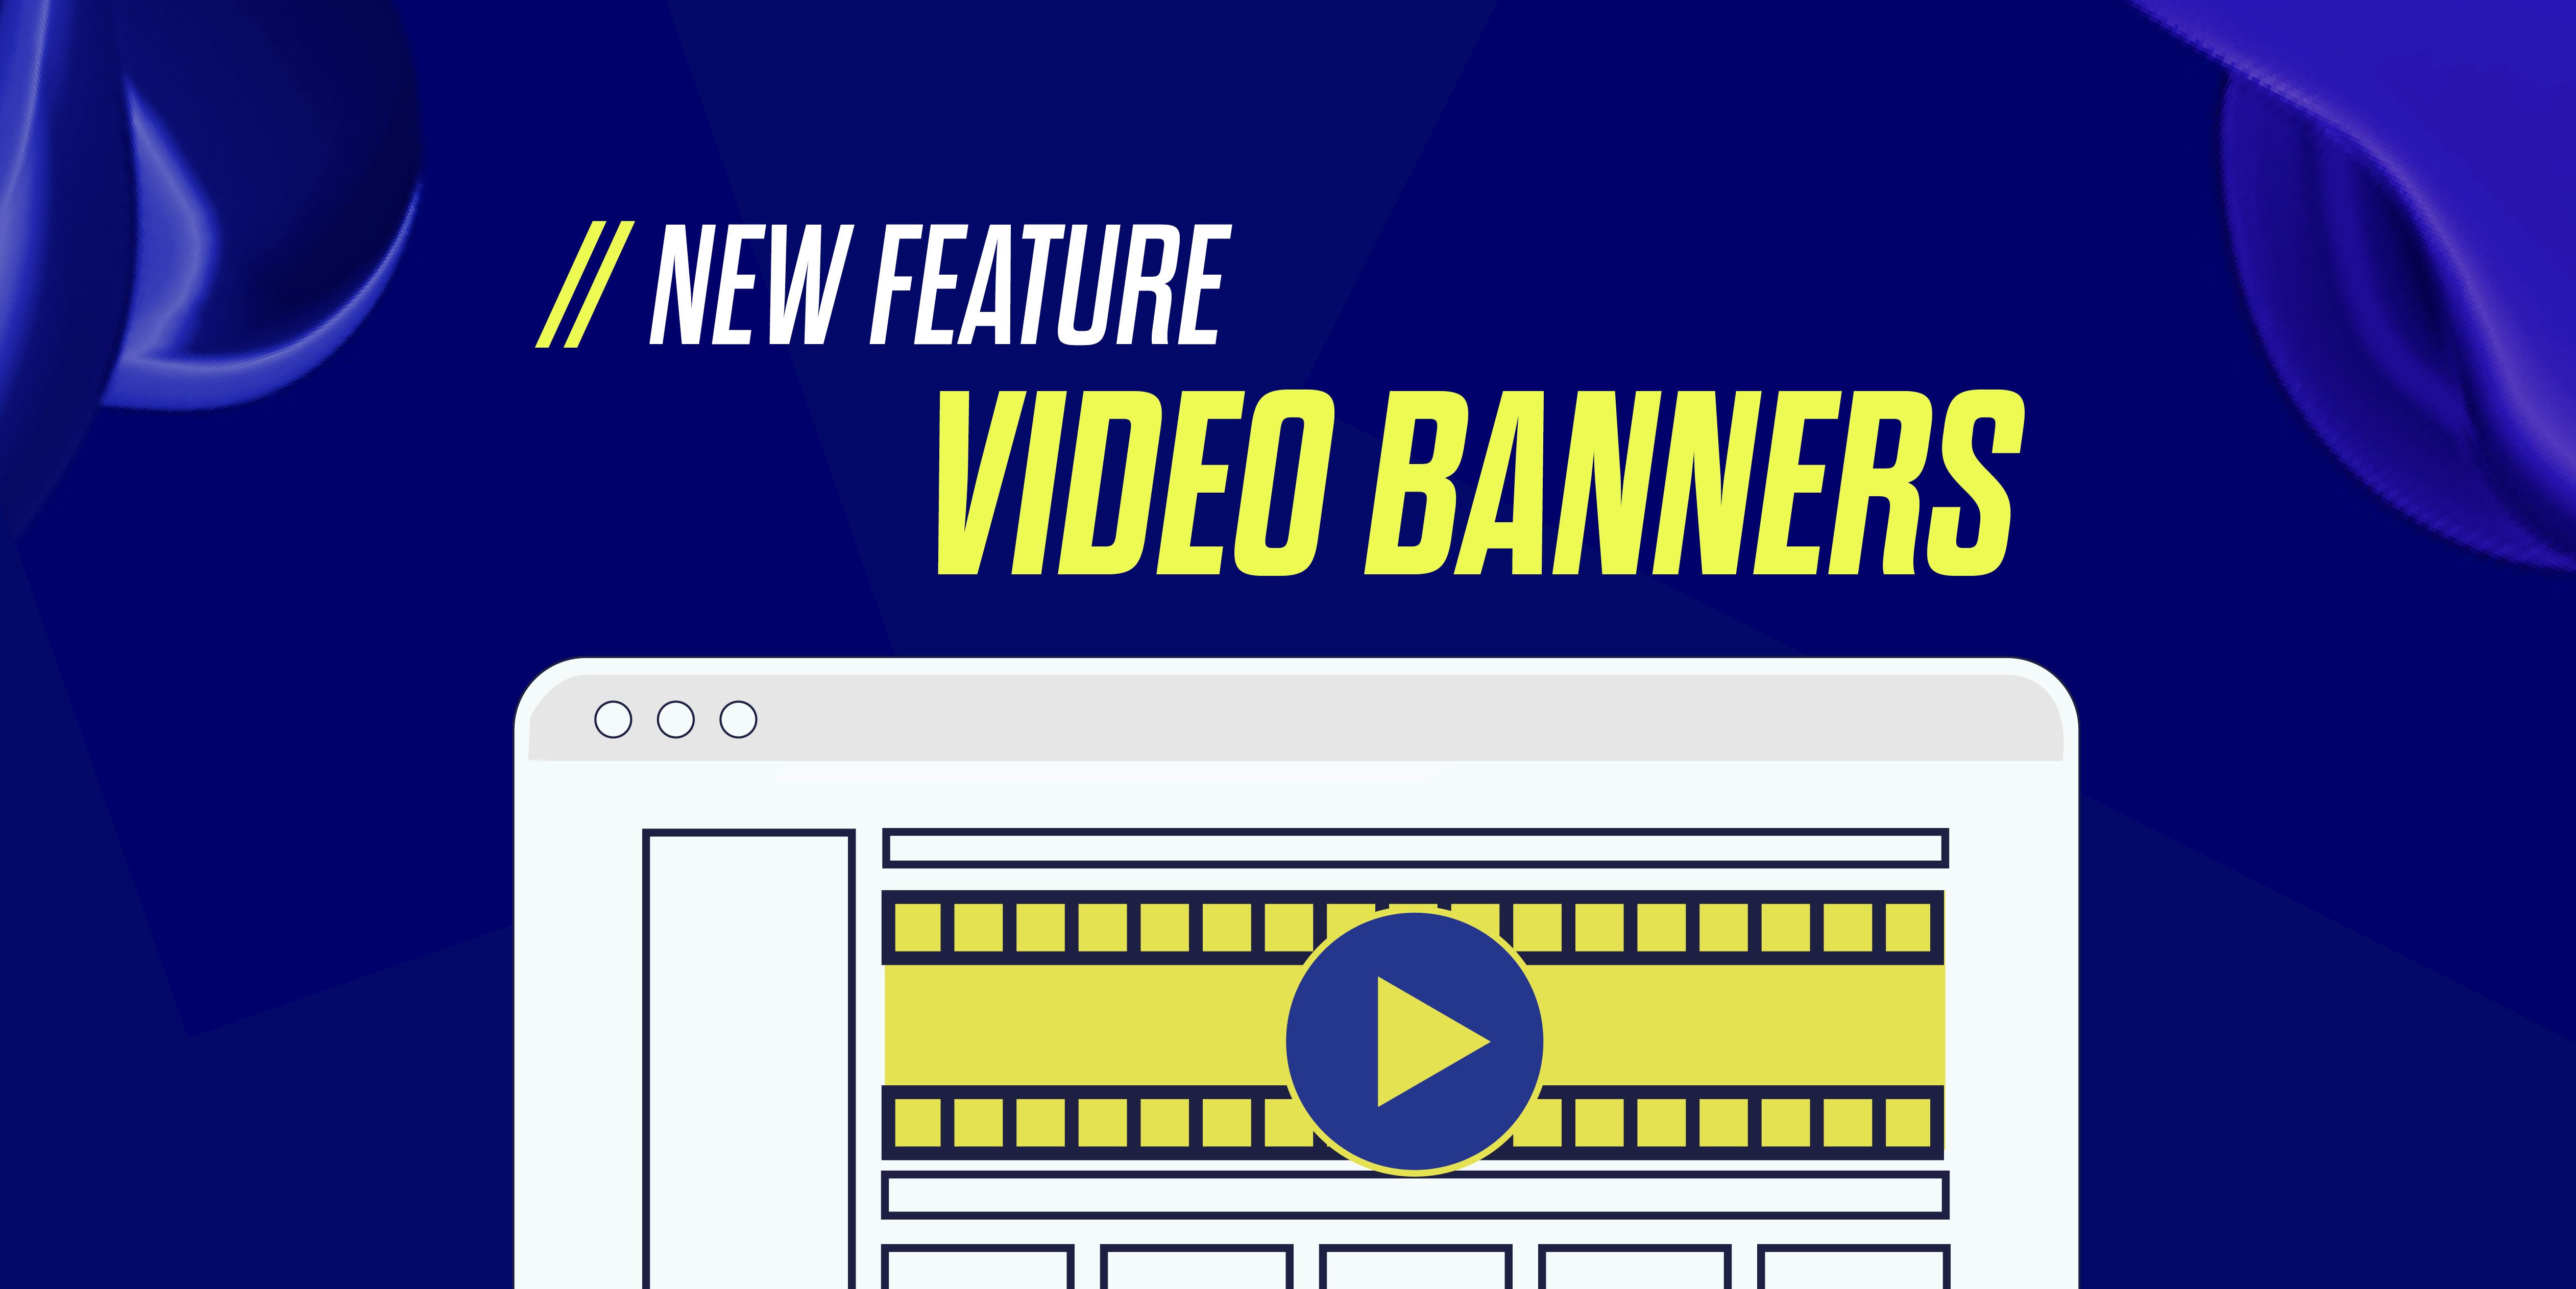 Video banner is now available in TrafficStars